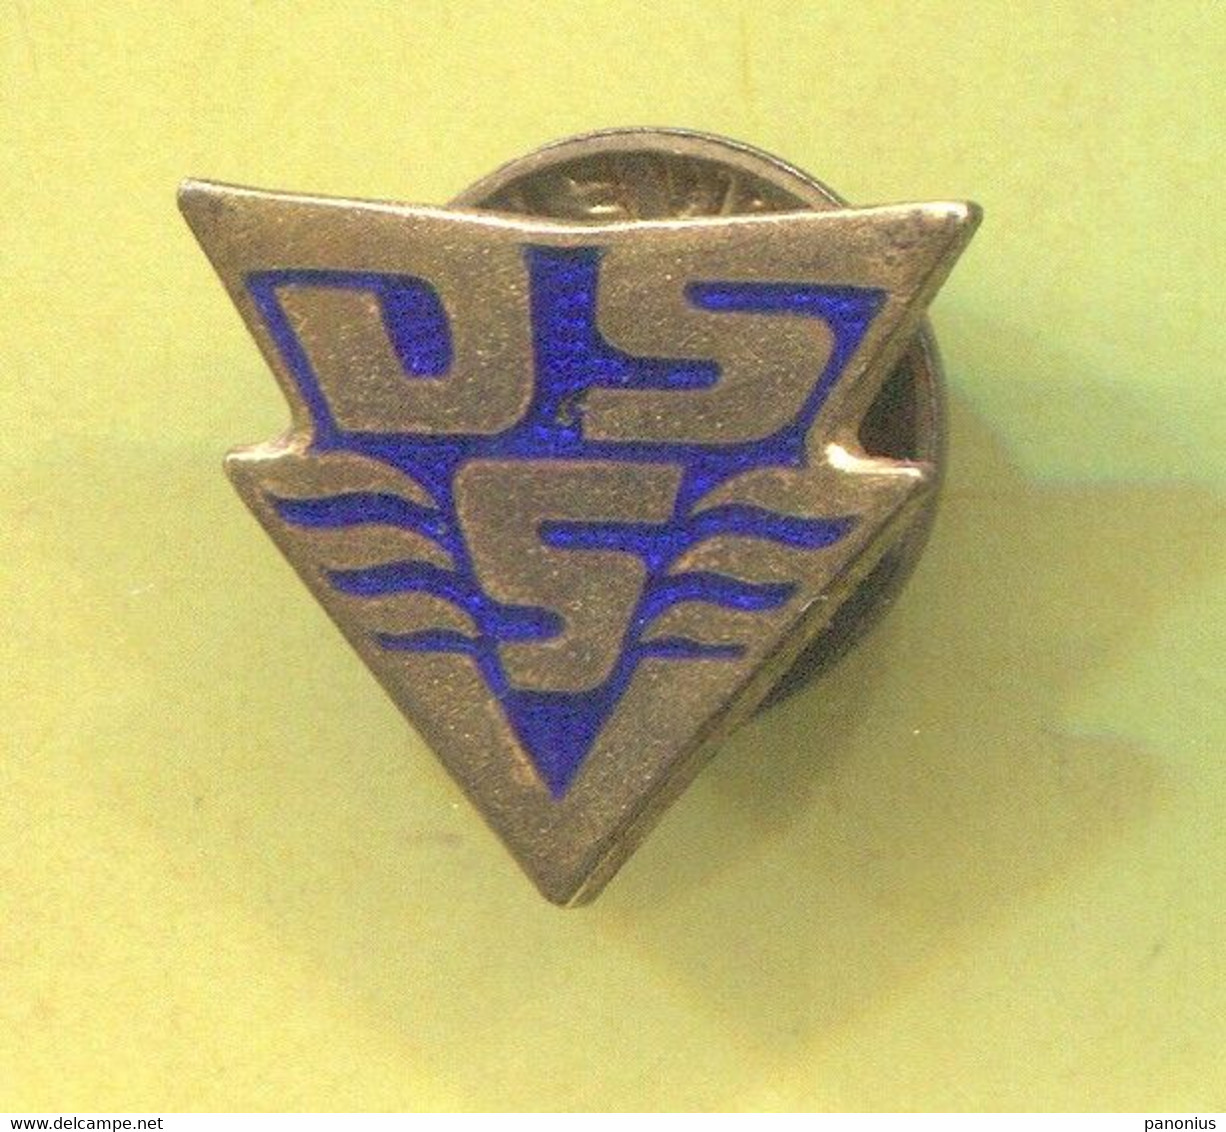 Swimming Natation - DDR East Germany, Vintage Pin Badge Abzeichen - Schwimmen